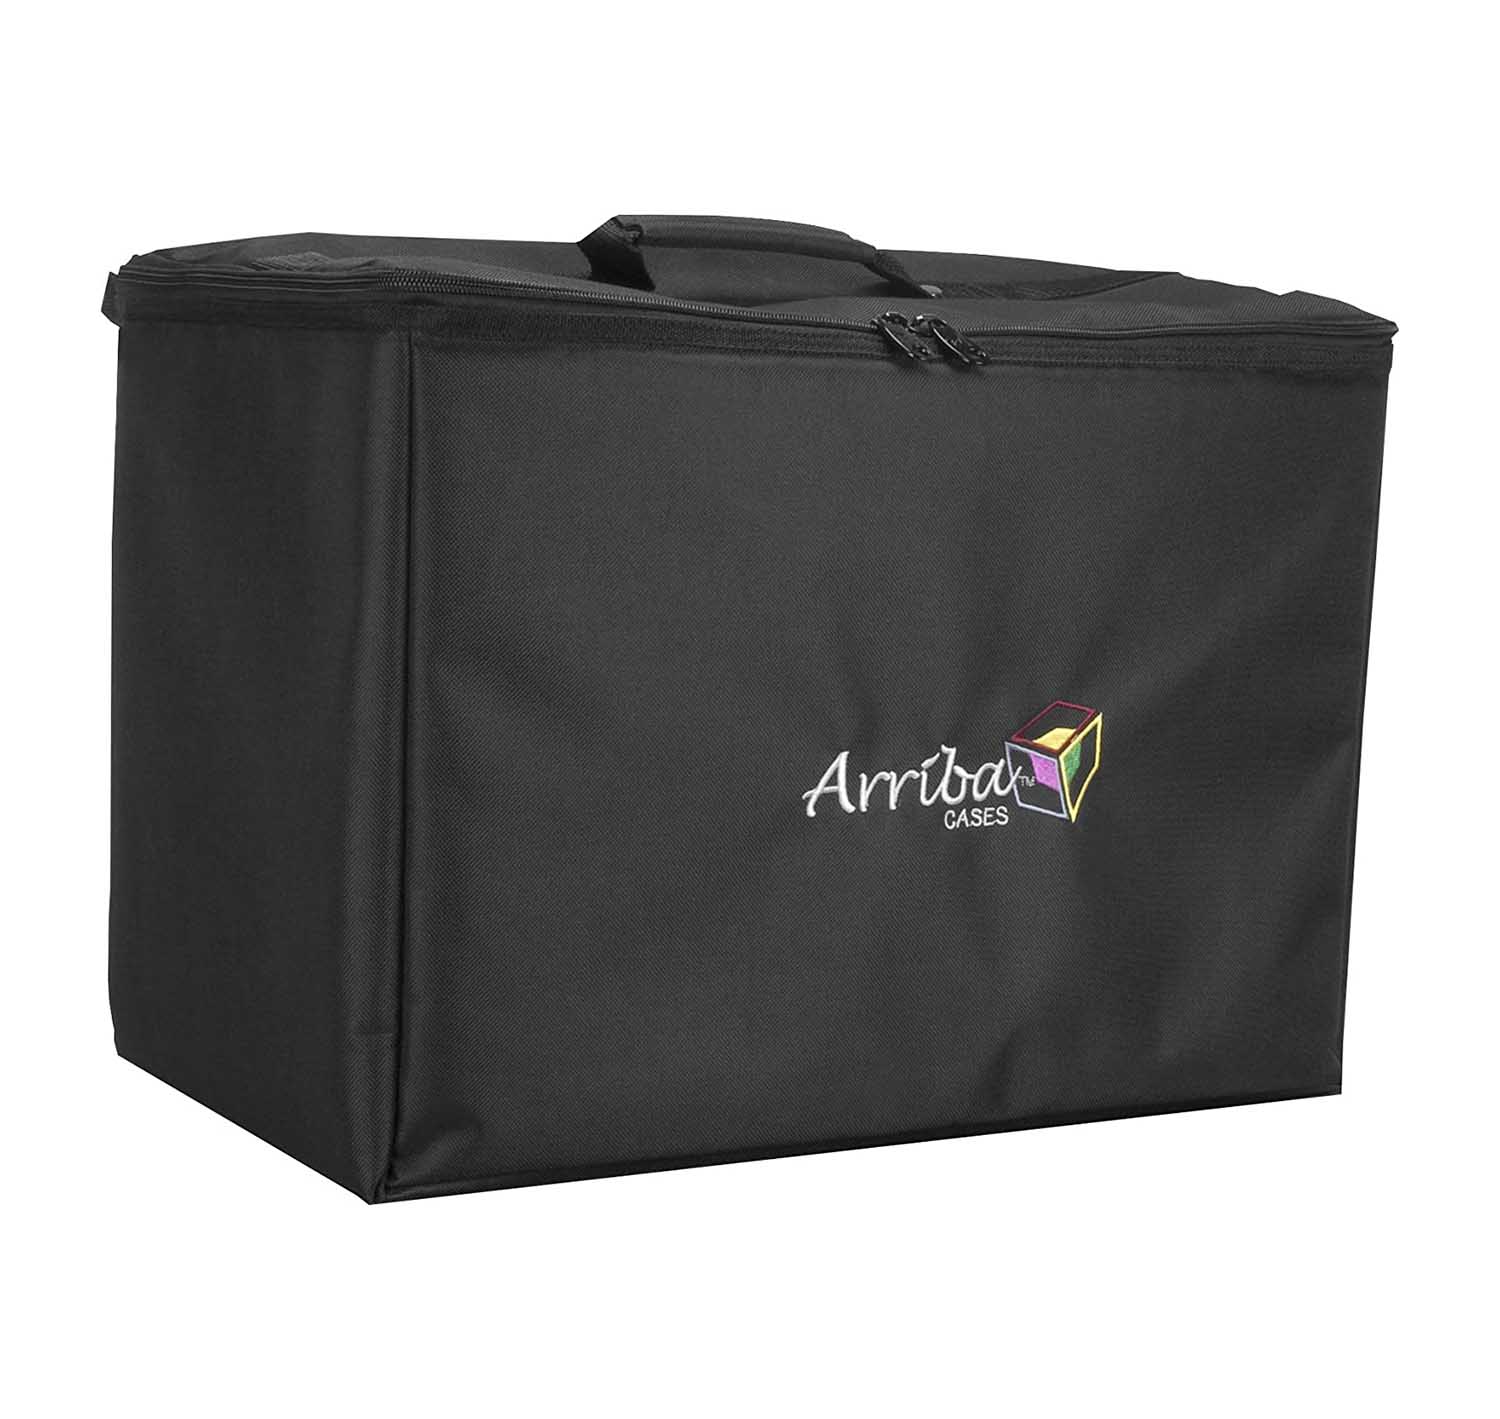 Arriba Cases ATP22 Multi-Purpose Stackable Rolling Case - Hollywood DJ